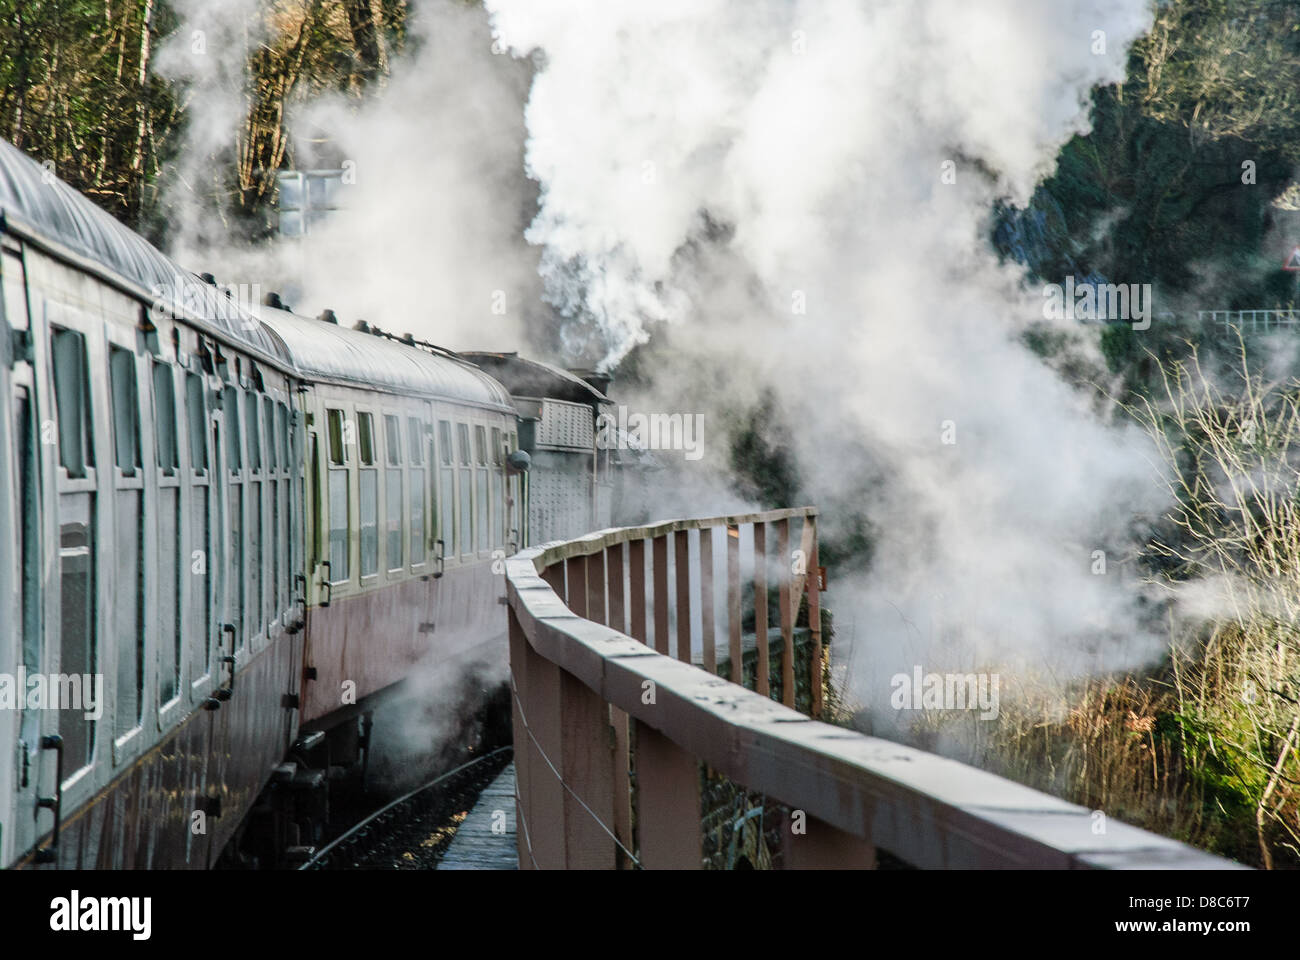 a steam train in Llangollen a small town and community in Denbighshire, north-east Wales Stock Photo